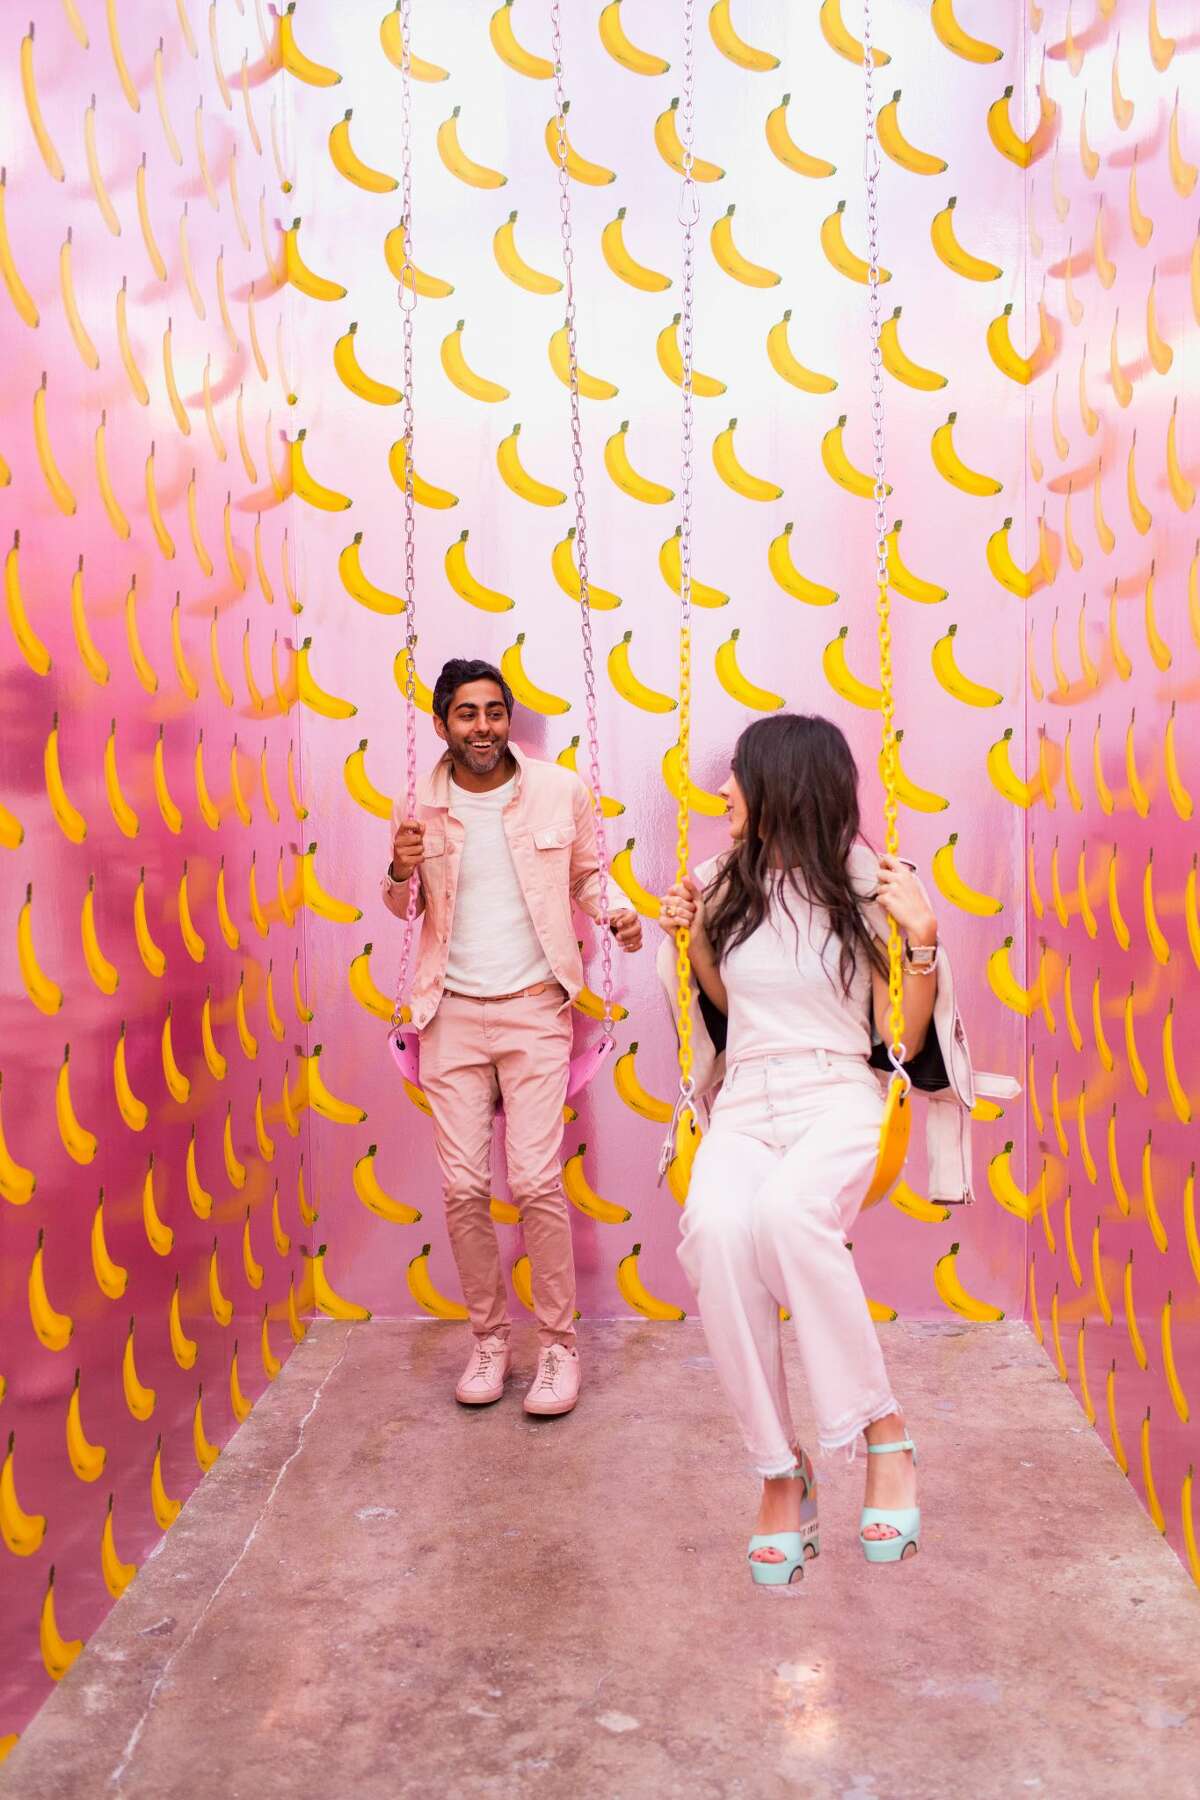 The Museum of Ice Cream is headed to San Francisco this September